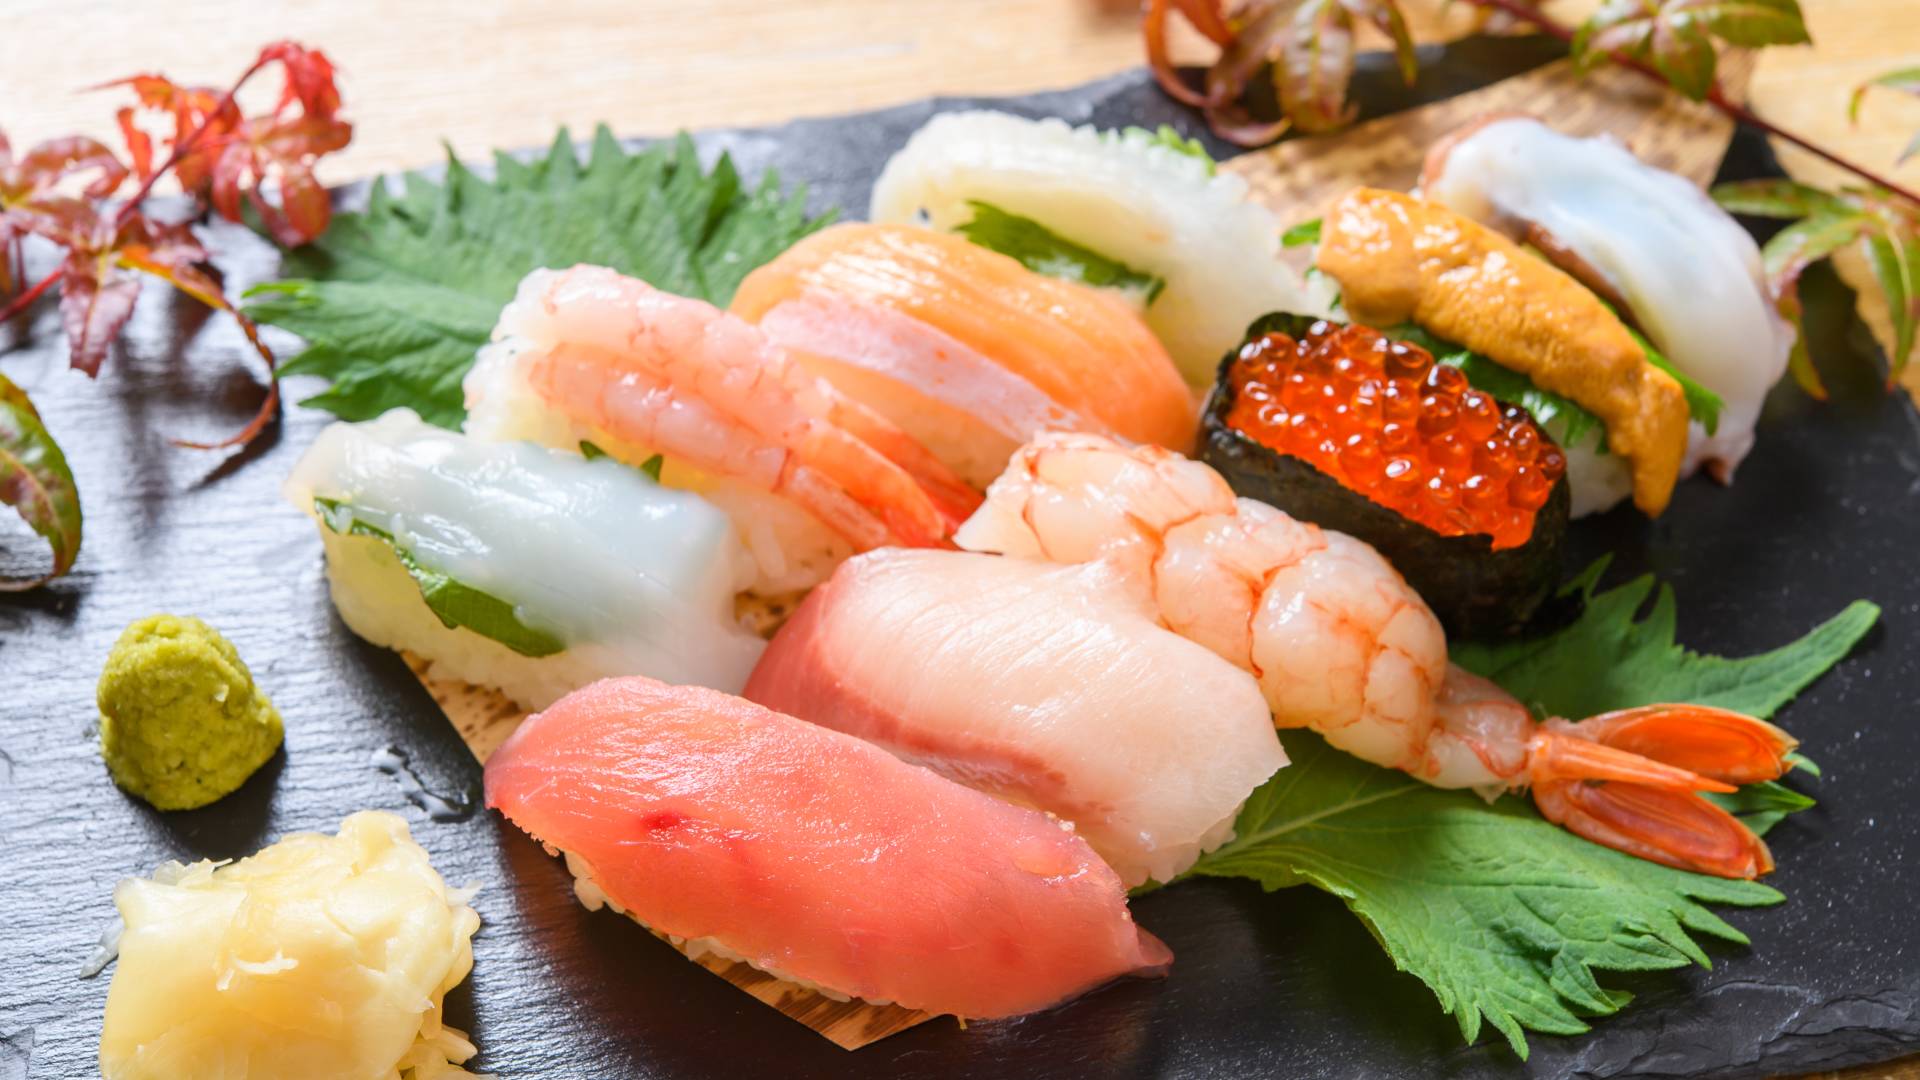 https://www.gotokyo.org/en/story/guide/from-skipjack-to-salmon-a-guide-to-eating-sushi-in-tokyo/images/sg012_1376_26.jpg